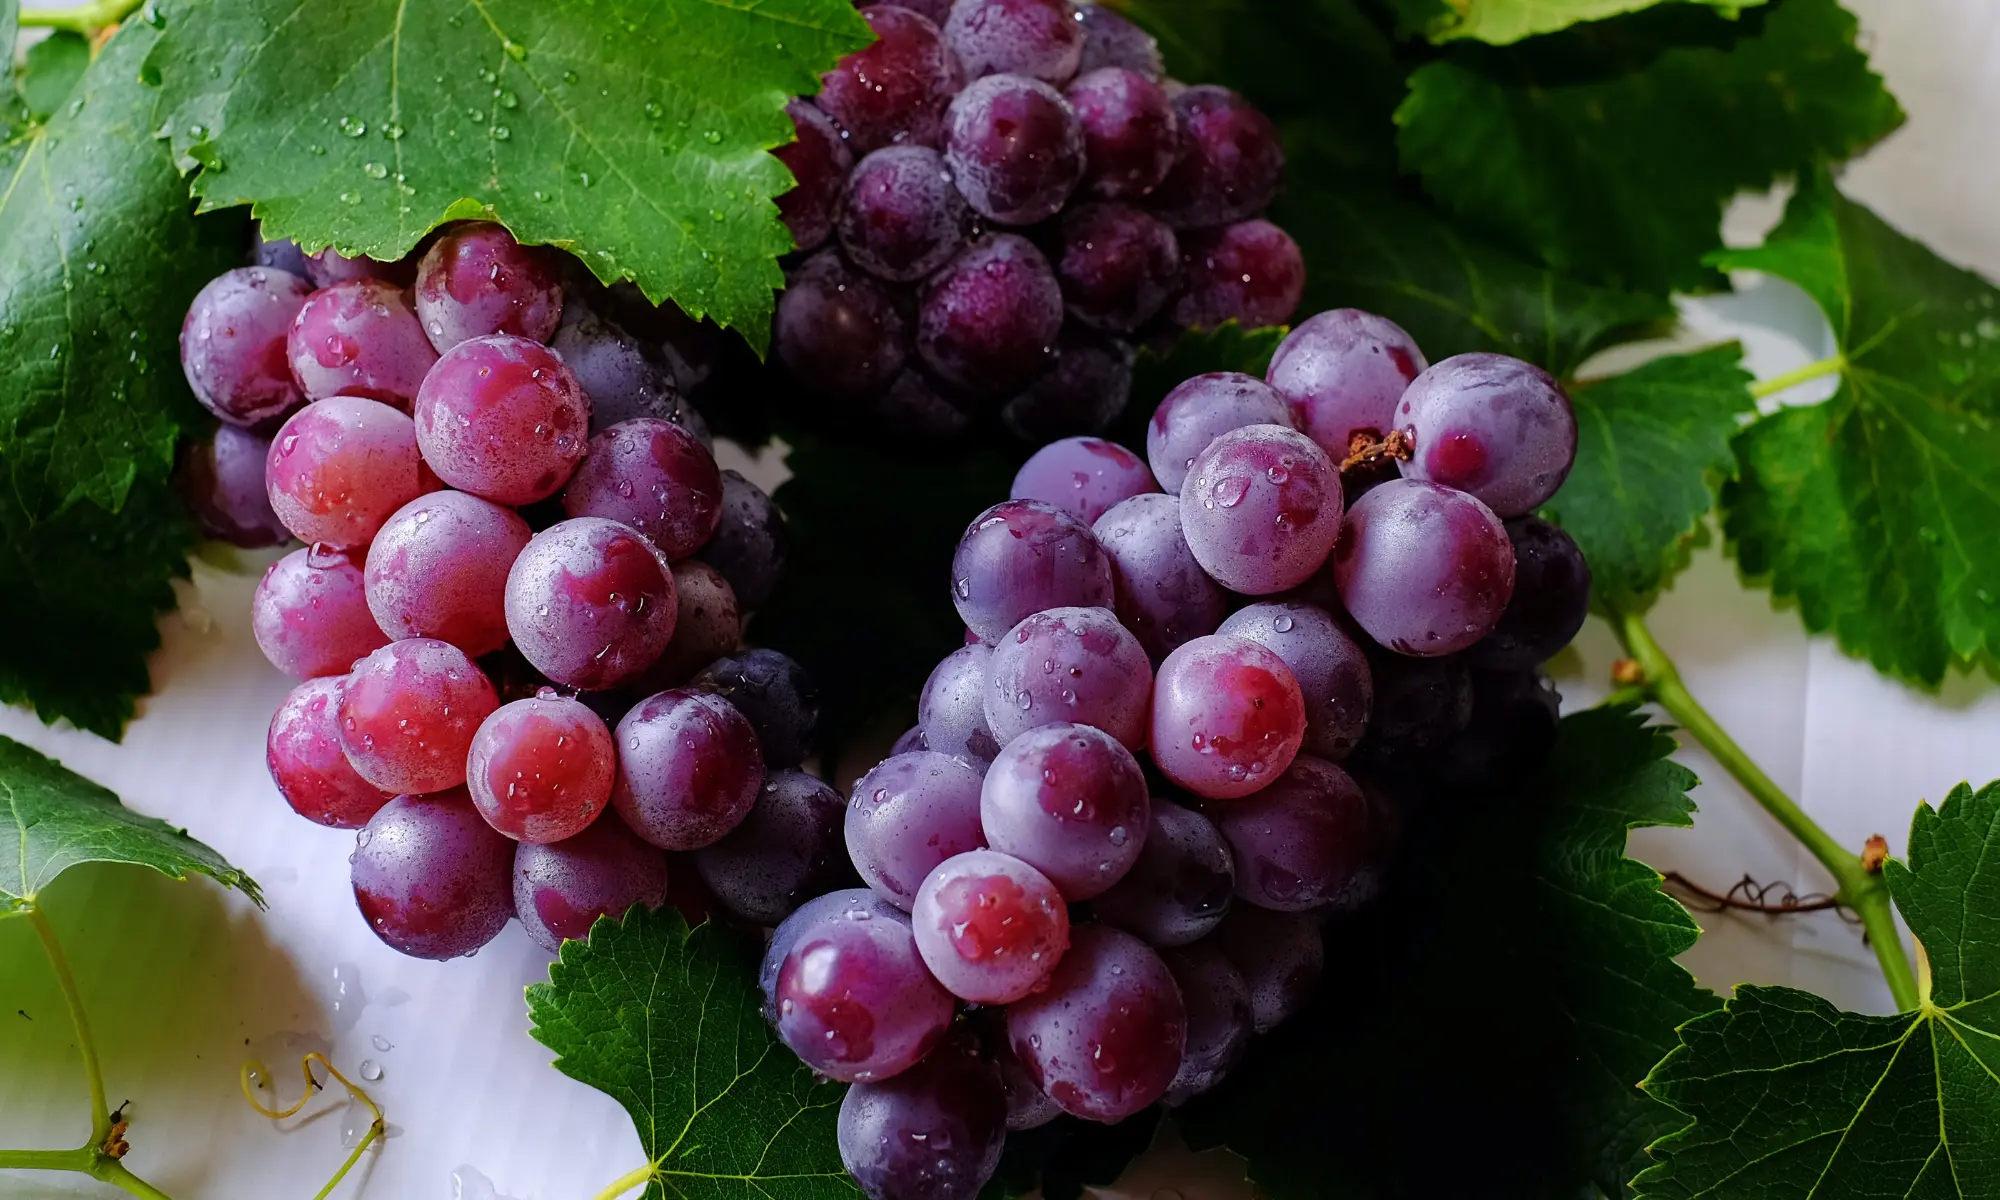 Bunches of dewy purple grapes on the vine.